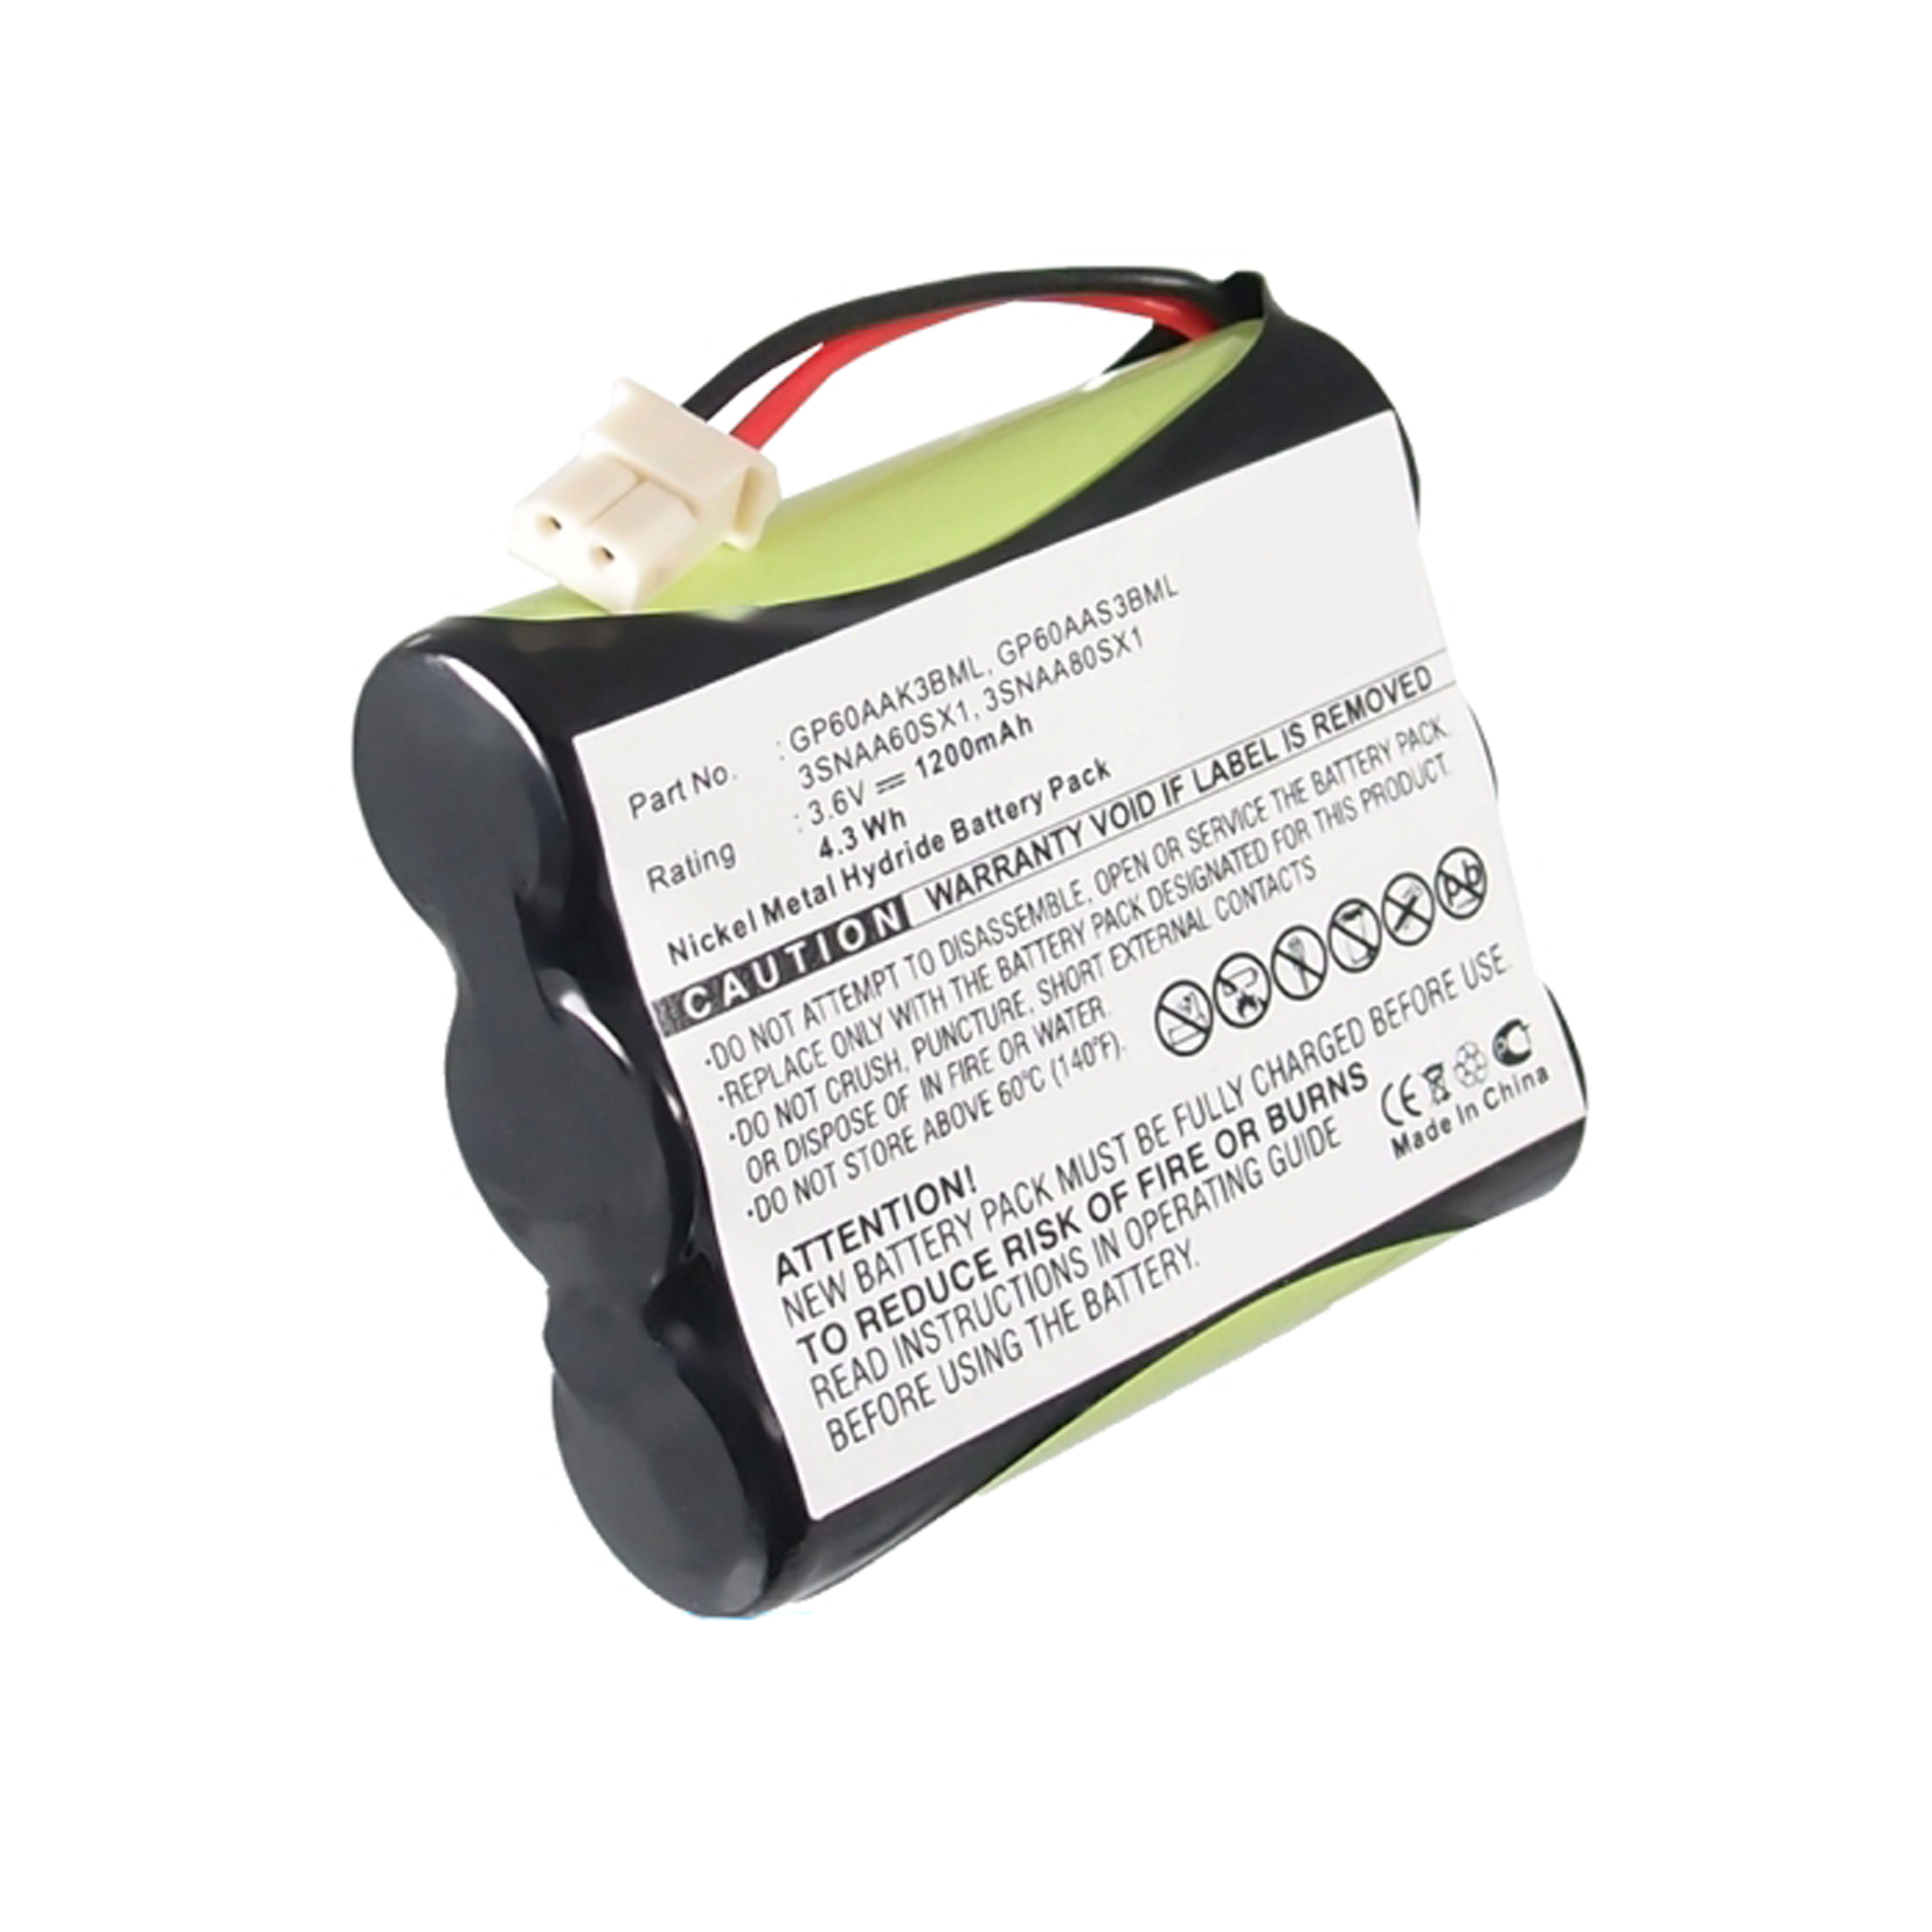 3AA-W - Ni-CD, 3.6 Volt, 600 mAh, Ultra Hi-Capacity Battery - Replacement Battery for Sony BP-T33 Cordless Phone Battery